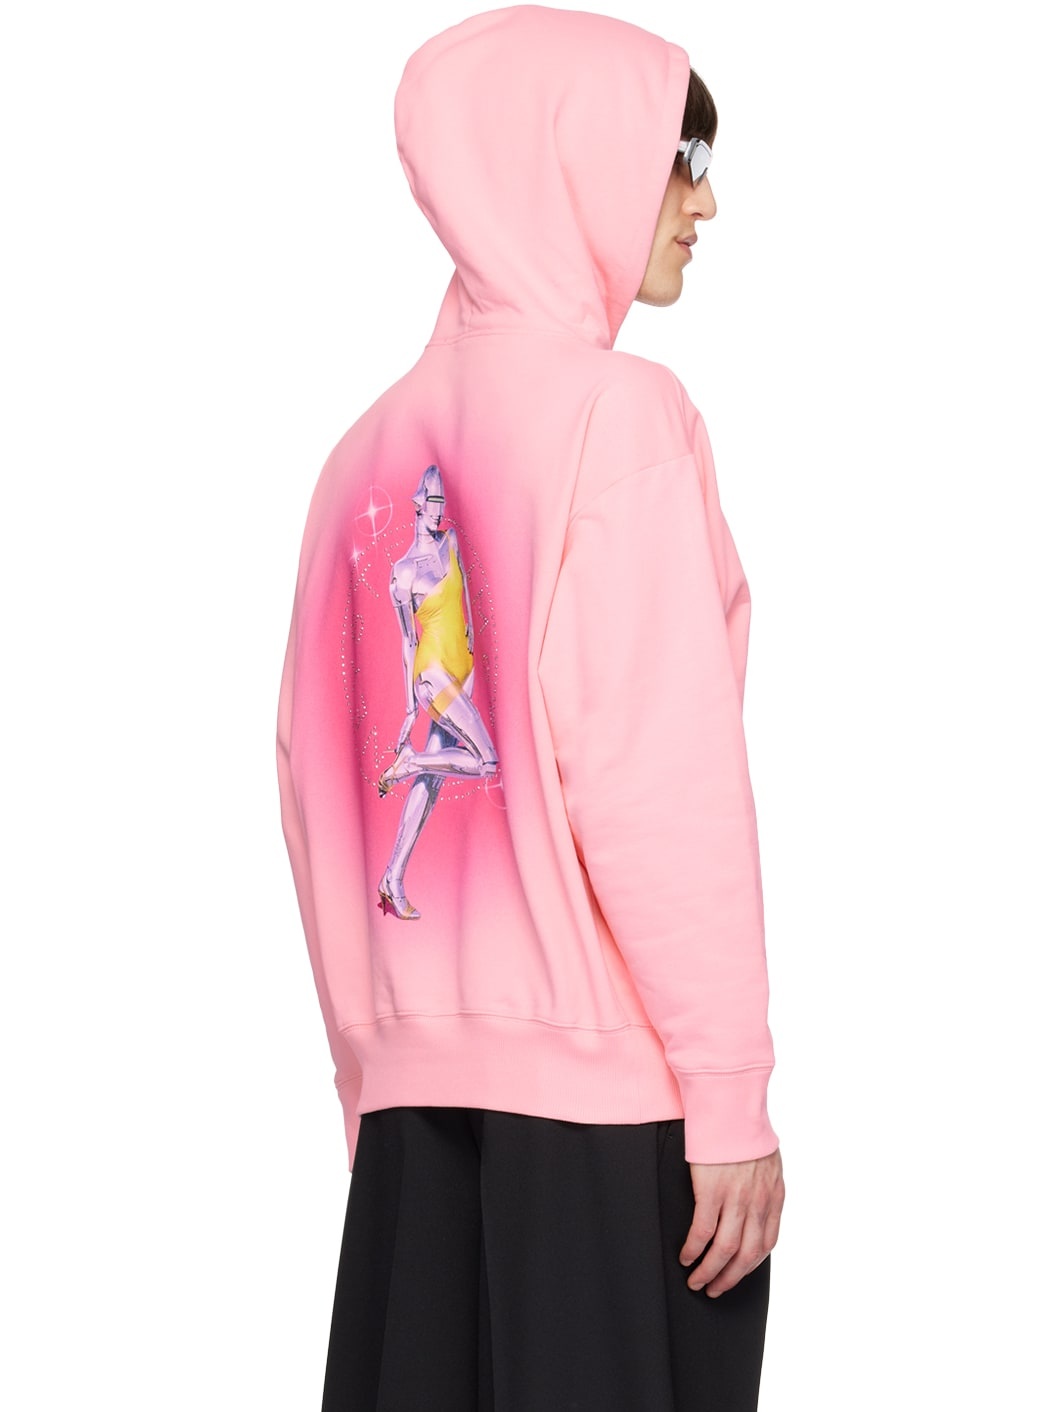 Pink Sexy Robot Hoodie - 3